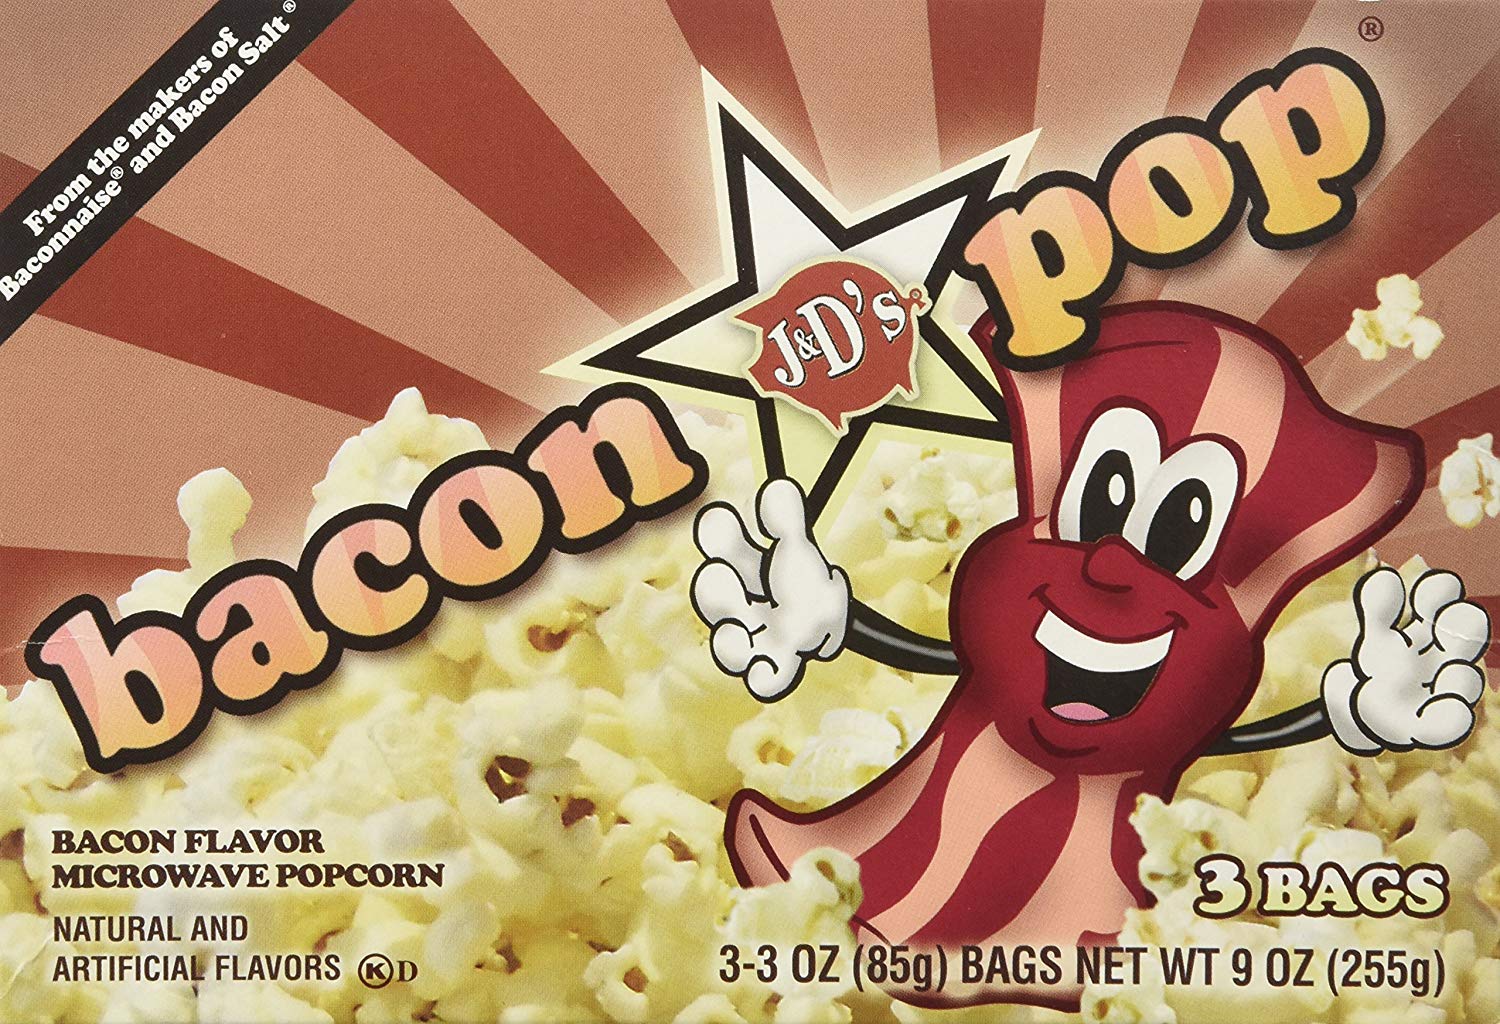 Popcorn - From the makers of Baconnaise and Bacon Salt no bacon, pop Bacon Flavor Microwave Popcorn Natural And Artificial Flavors D 3 Bags 33 Oz 859 Bags Net Wt 9 Oz 2559